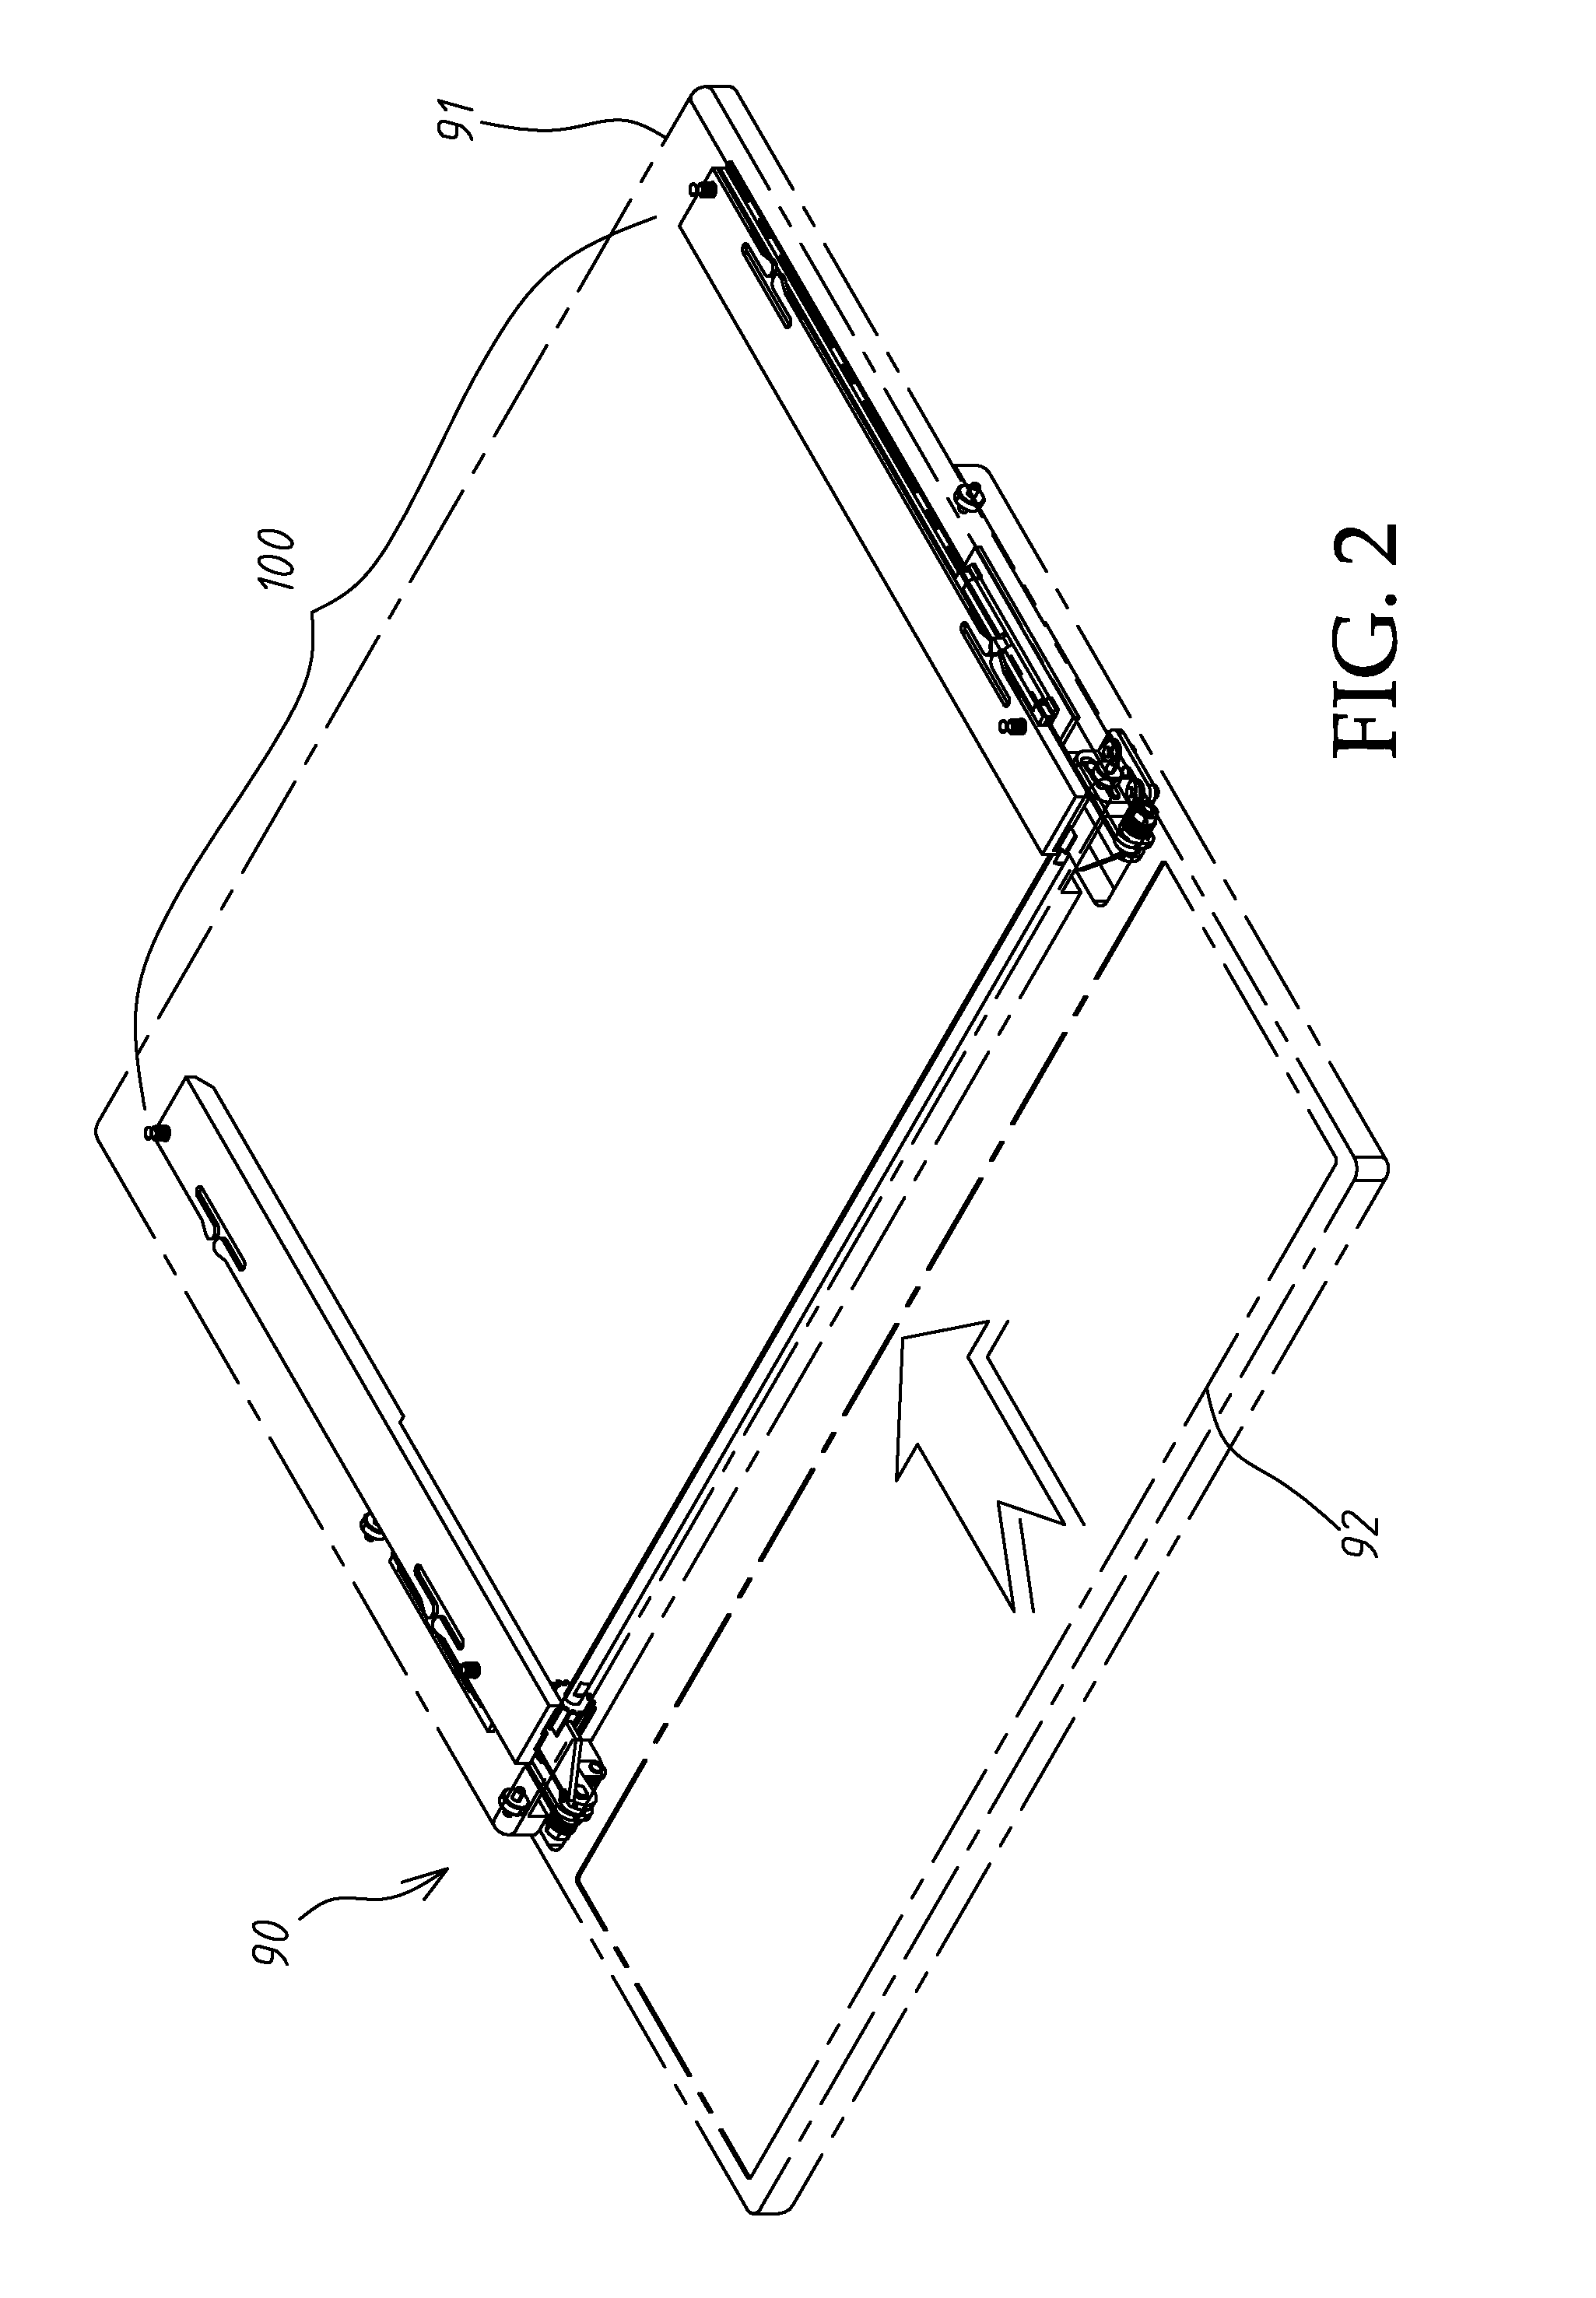 Liftable slide cover mounting structure using a sheet metal bracket mechanism